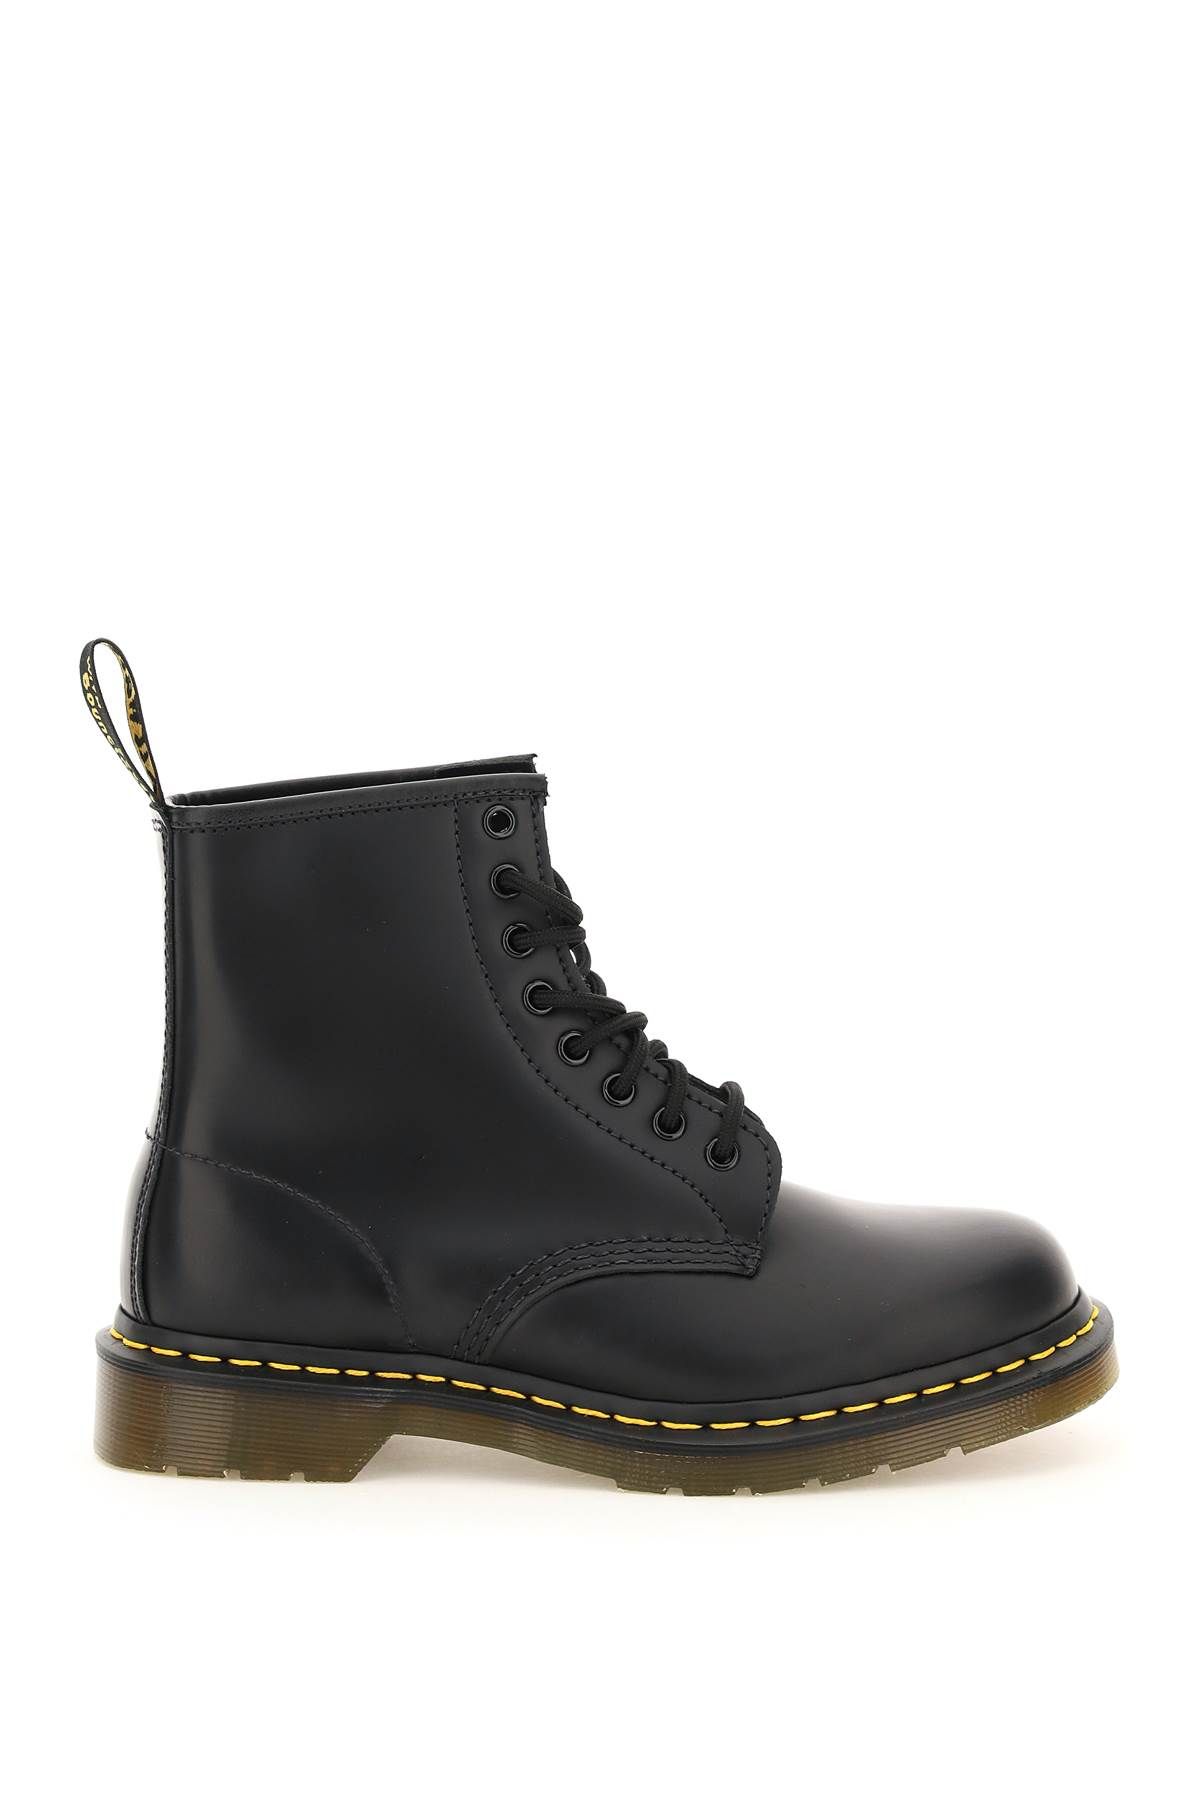 DR.MARTENS DR. MARTENS 1460 smooth lace-up combat boots